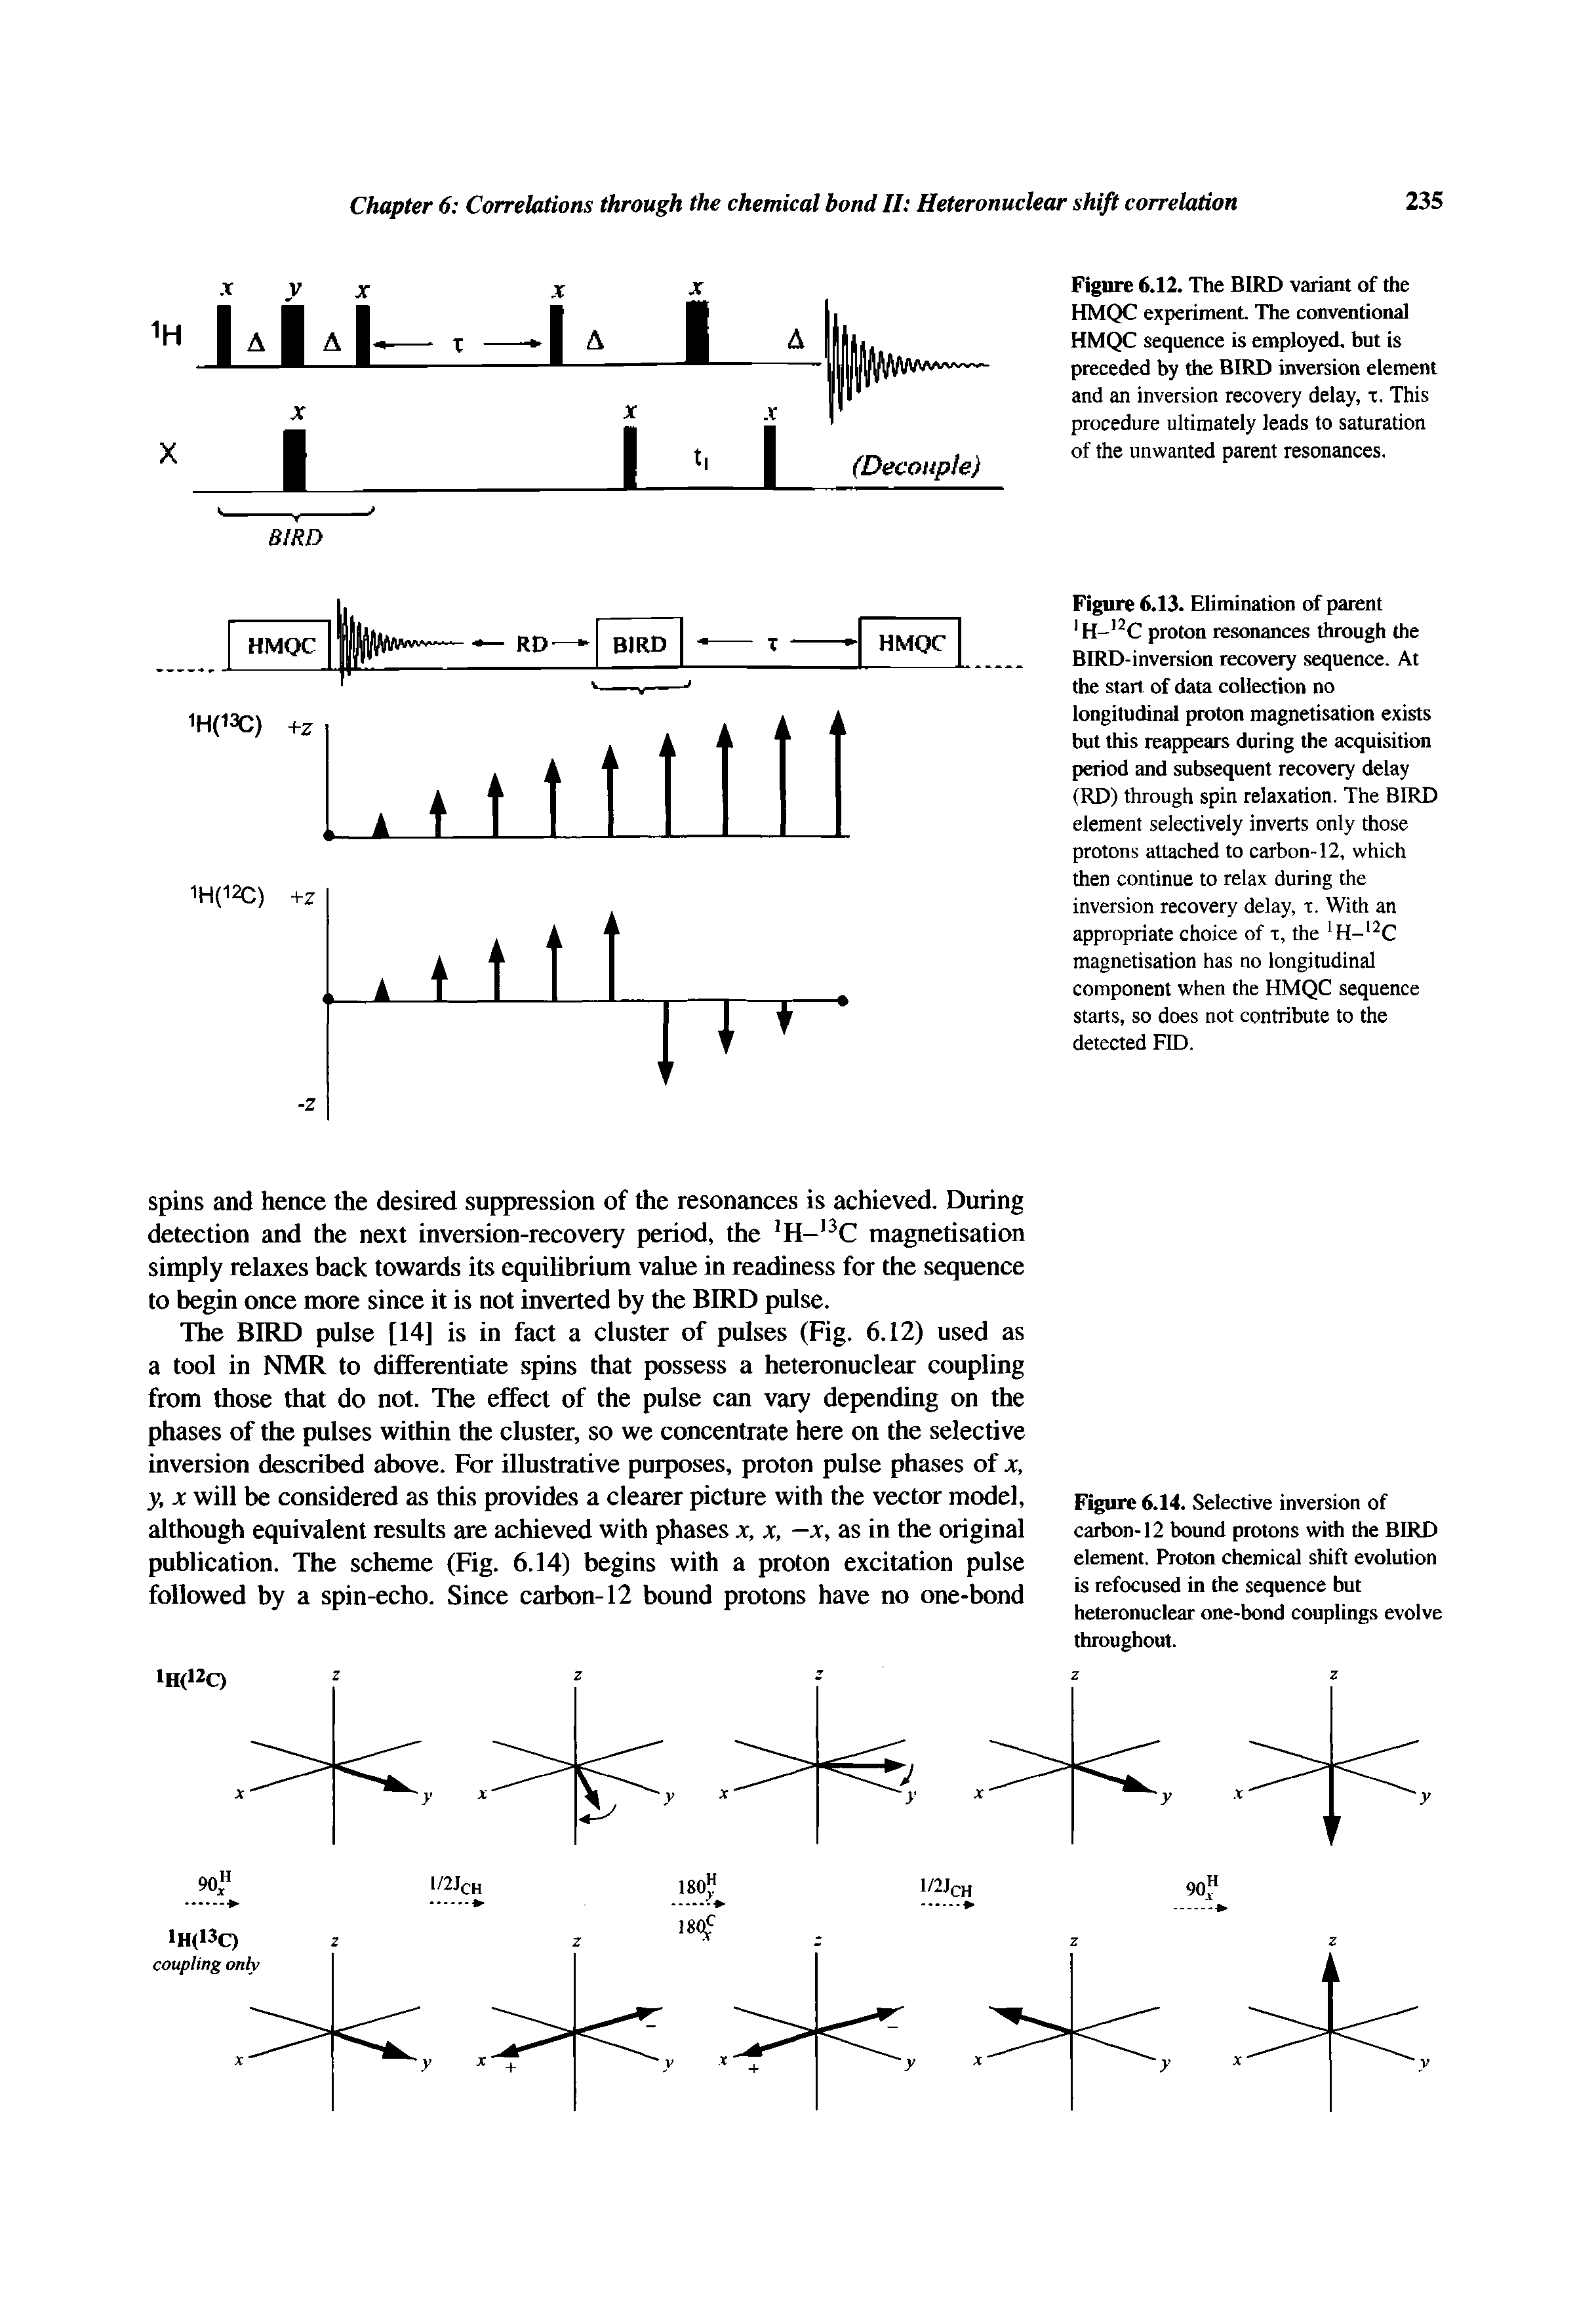 Figure 6.13. Elimination of parent H- C proton resonances through the BIRD-inversion recovery sequence. At the start of data collection no longitudinal proton magnetisation exists but this reappears during the acquisition period and subsequent recovery delay (RD) through spin relaxation. The BIRD element selectively inverts only those protons attached to carbon-12, which then continue to relax during the inversion recovery delay, r. With an appropriate choice of x, the magnetisation has no longitudinal component when the HMQC sequence starts, so does not contribute to the detected FID.